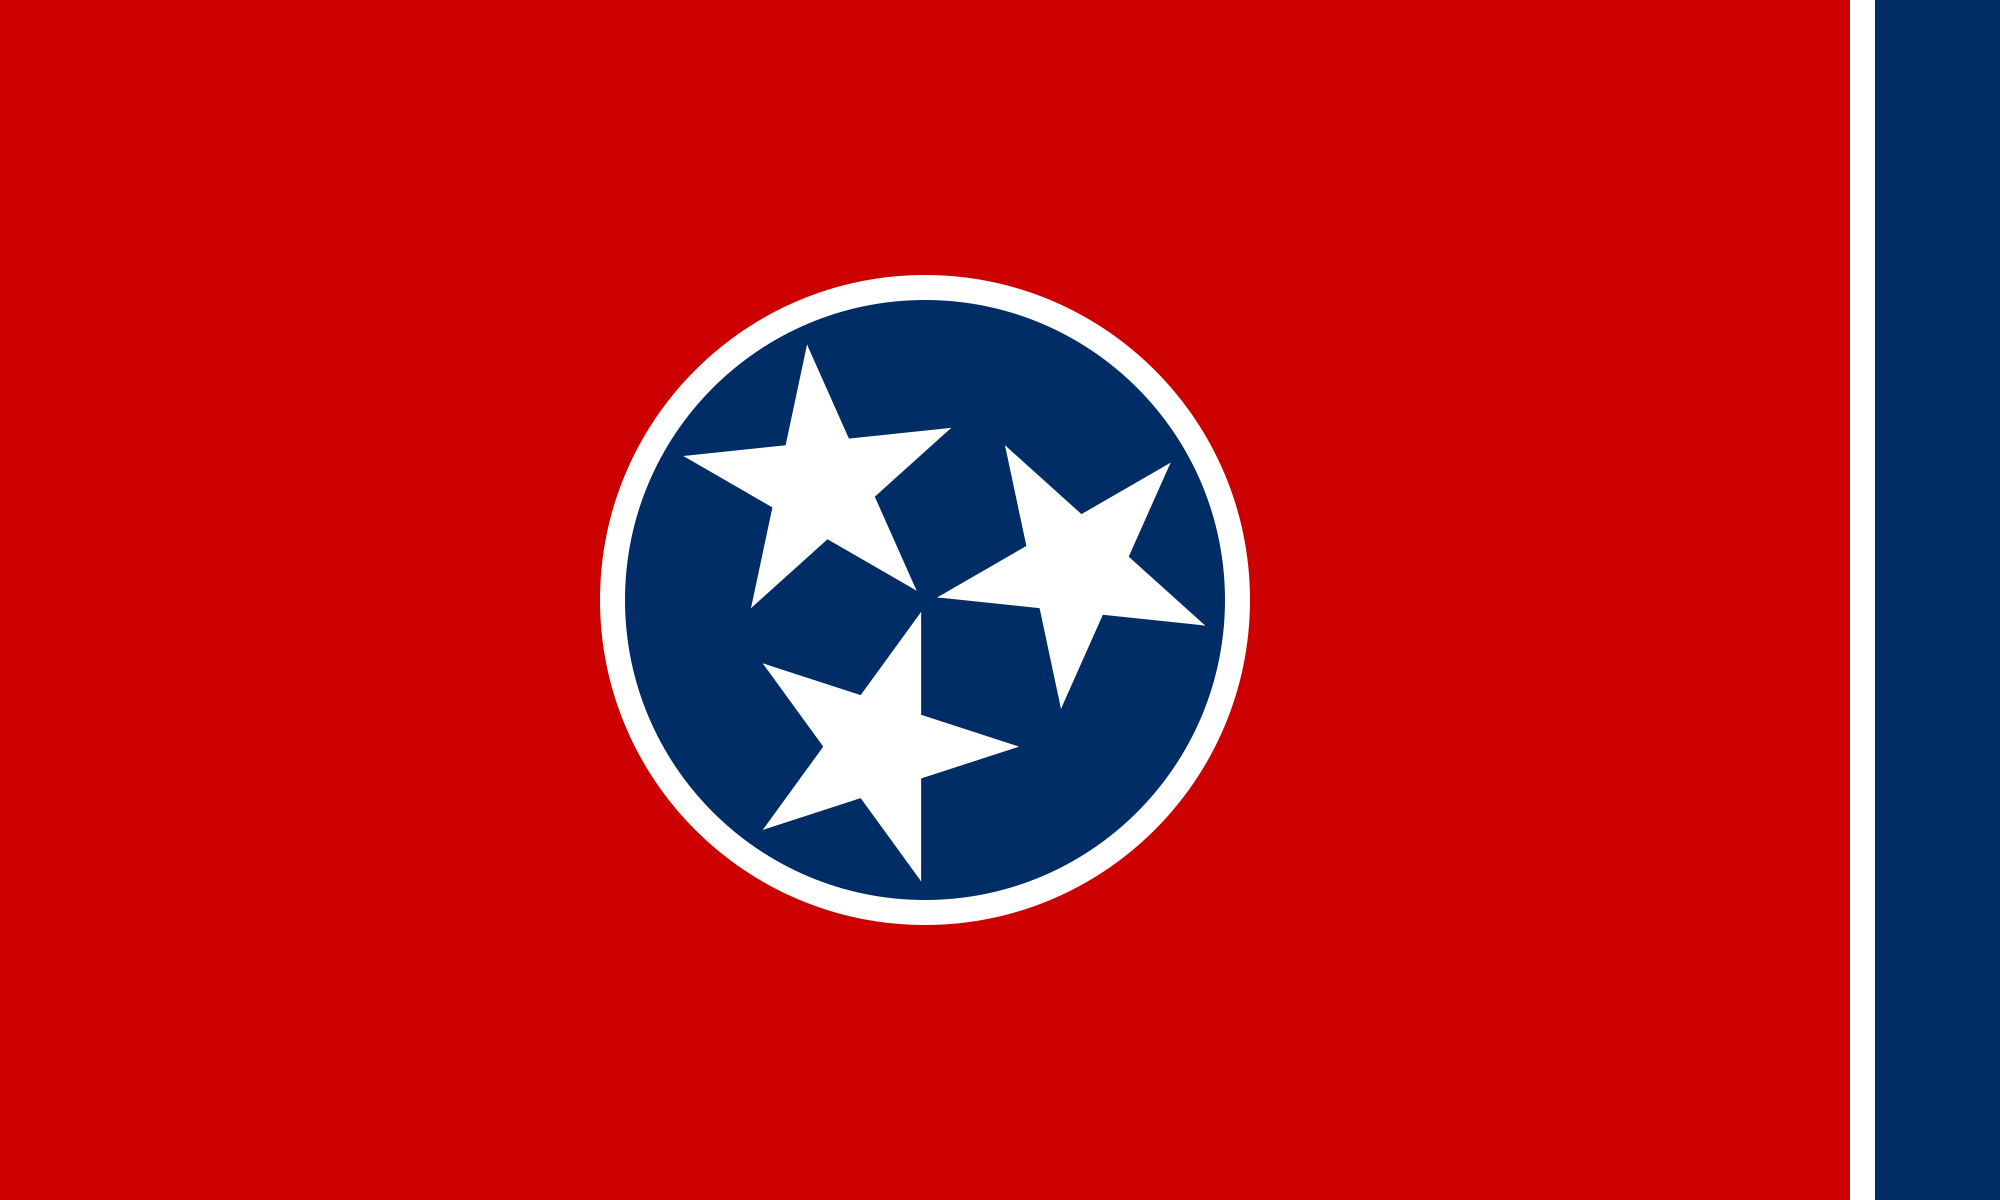 Red White and Blue Circular Logo - Flag of Tennessee